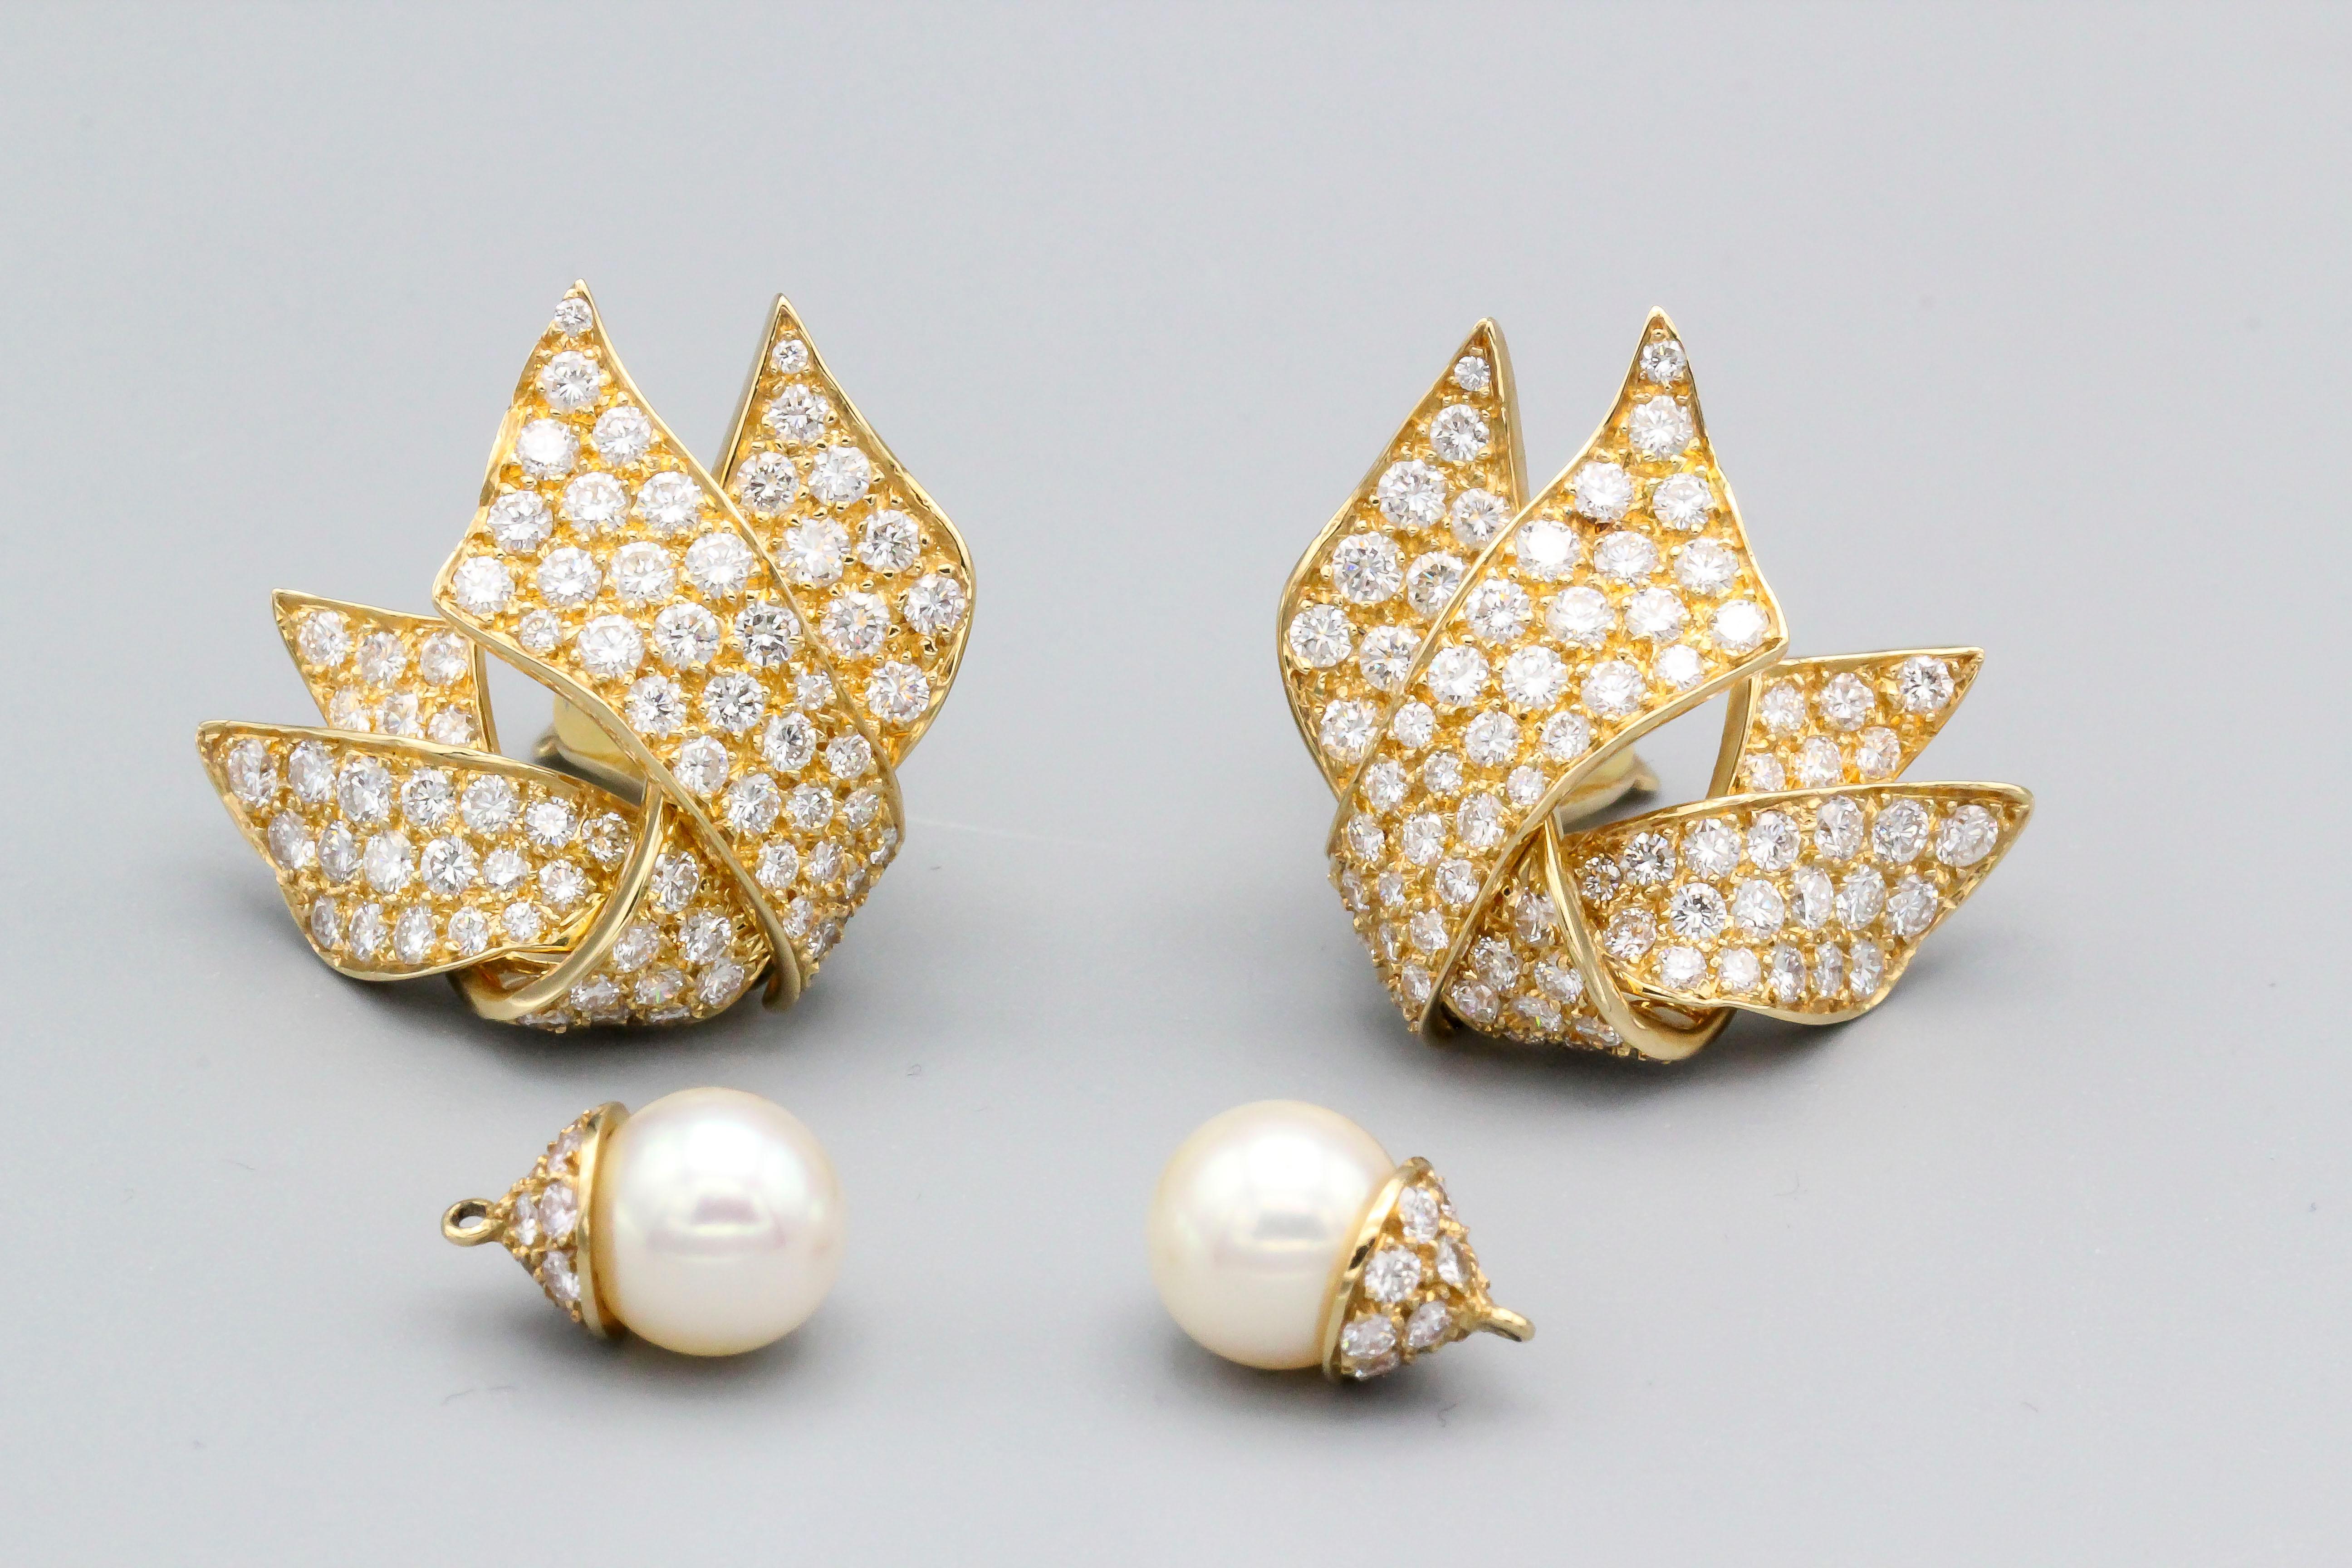 Chic diamond and 18K gold earrings with a removable pearl, by Chanel.   The pearl can be added in the nightime for a more striking effect. They feature high grade round brilliant cut diamonds of approx. 5-6 carats, the pearl measures 9 mm in